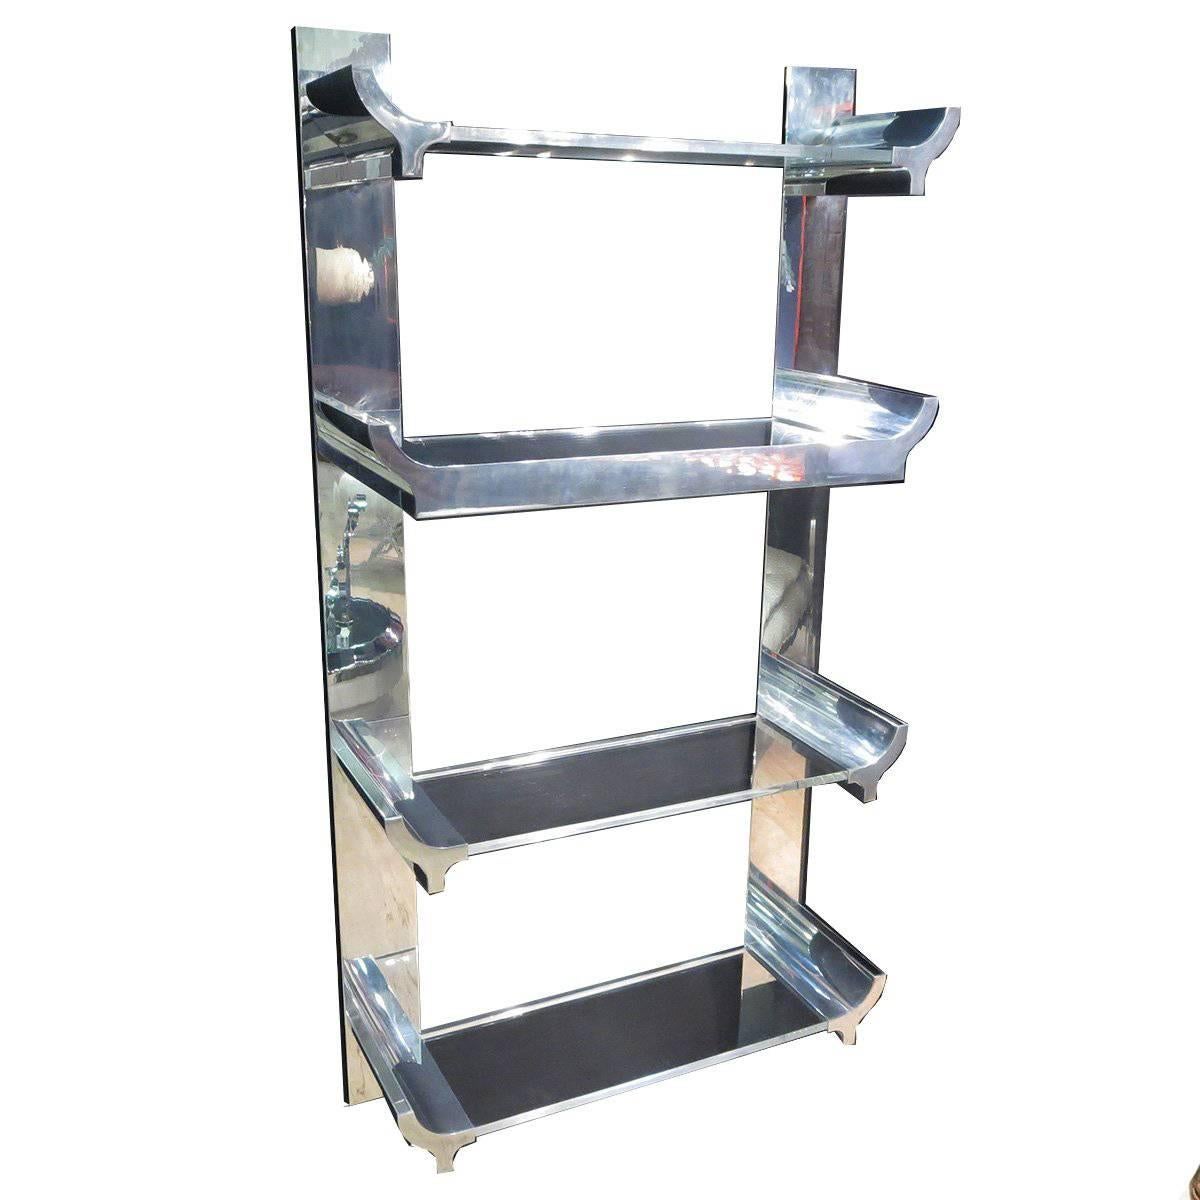 Rare Signed Karl Springer Lighted Wall Shelving Unit in Lucite and Aluminum